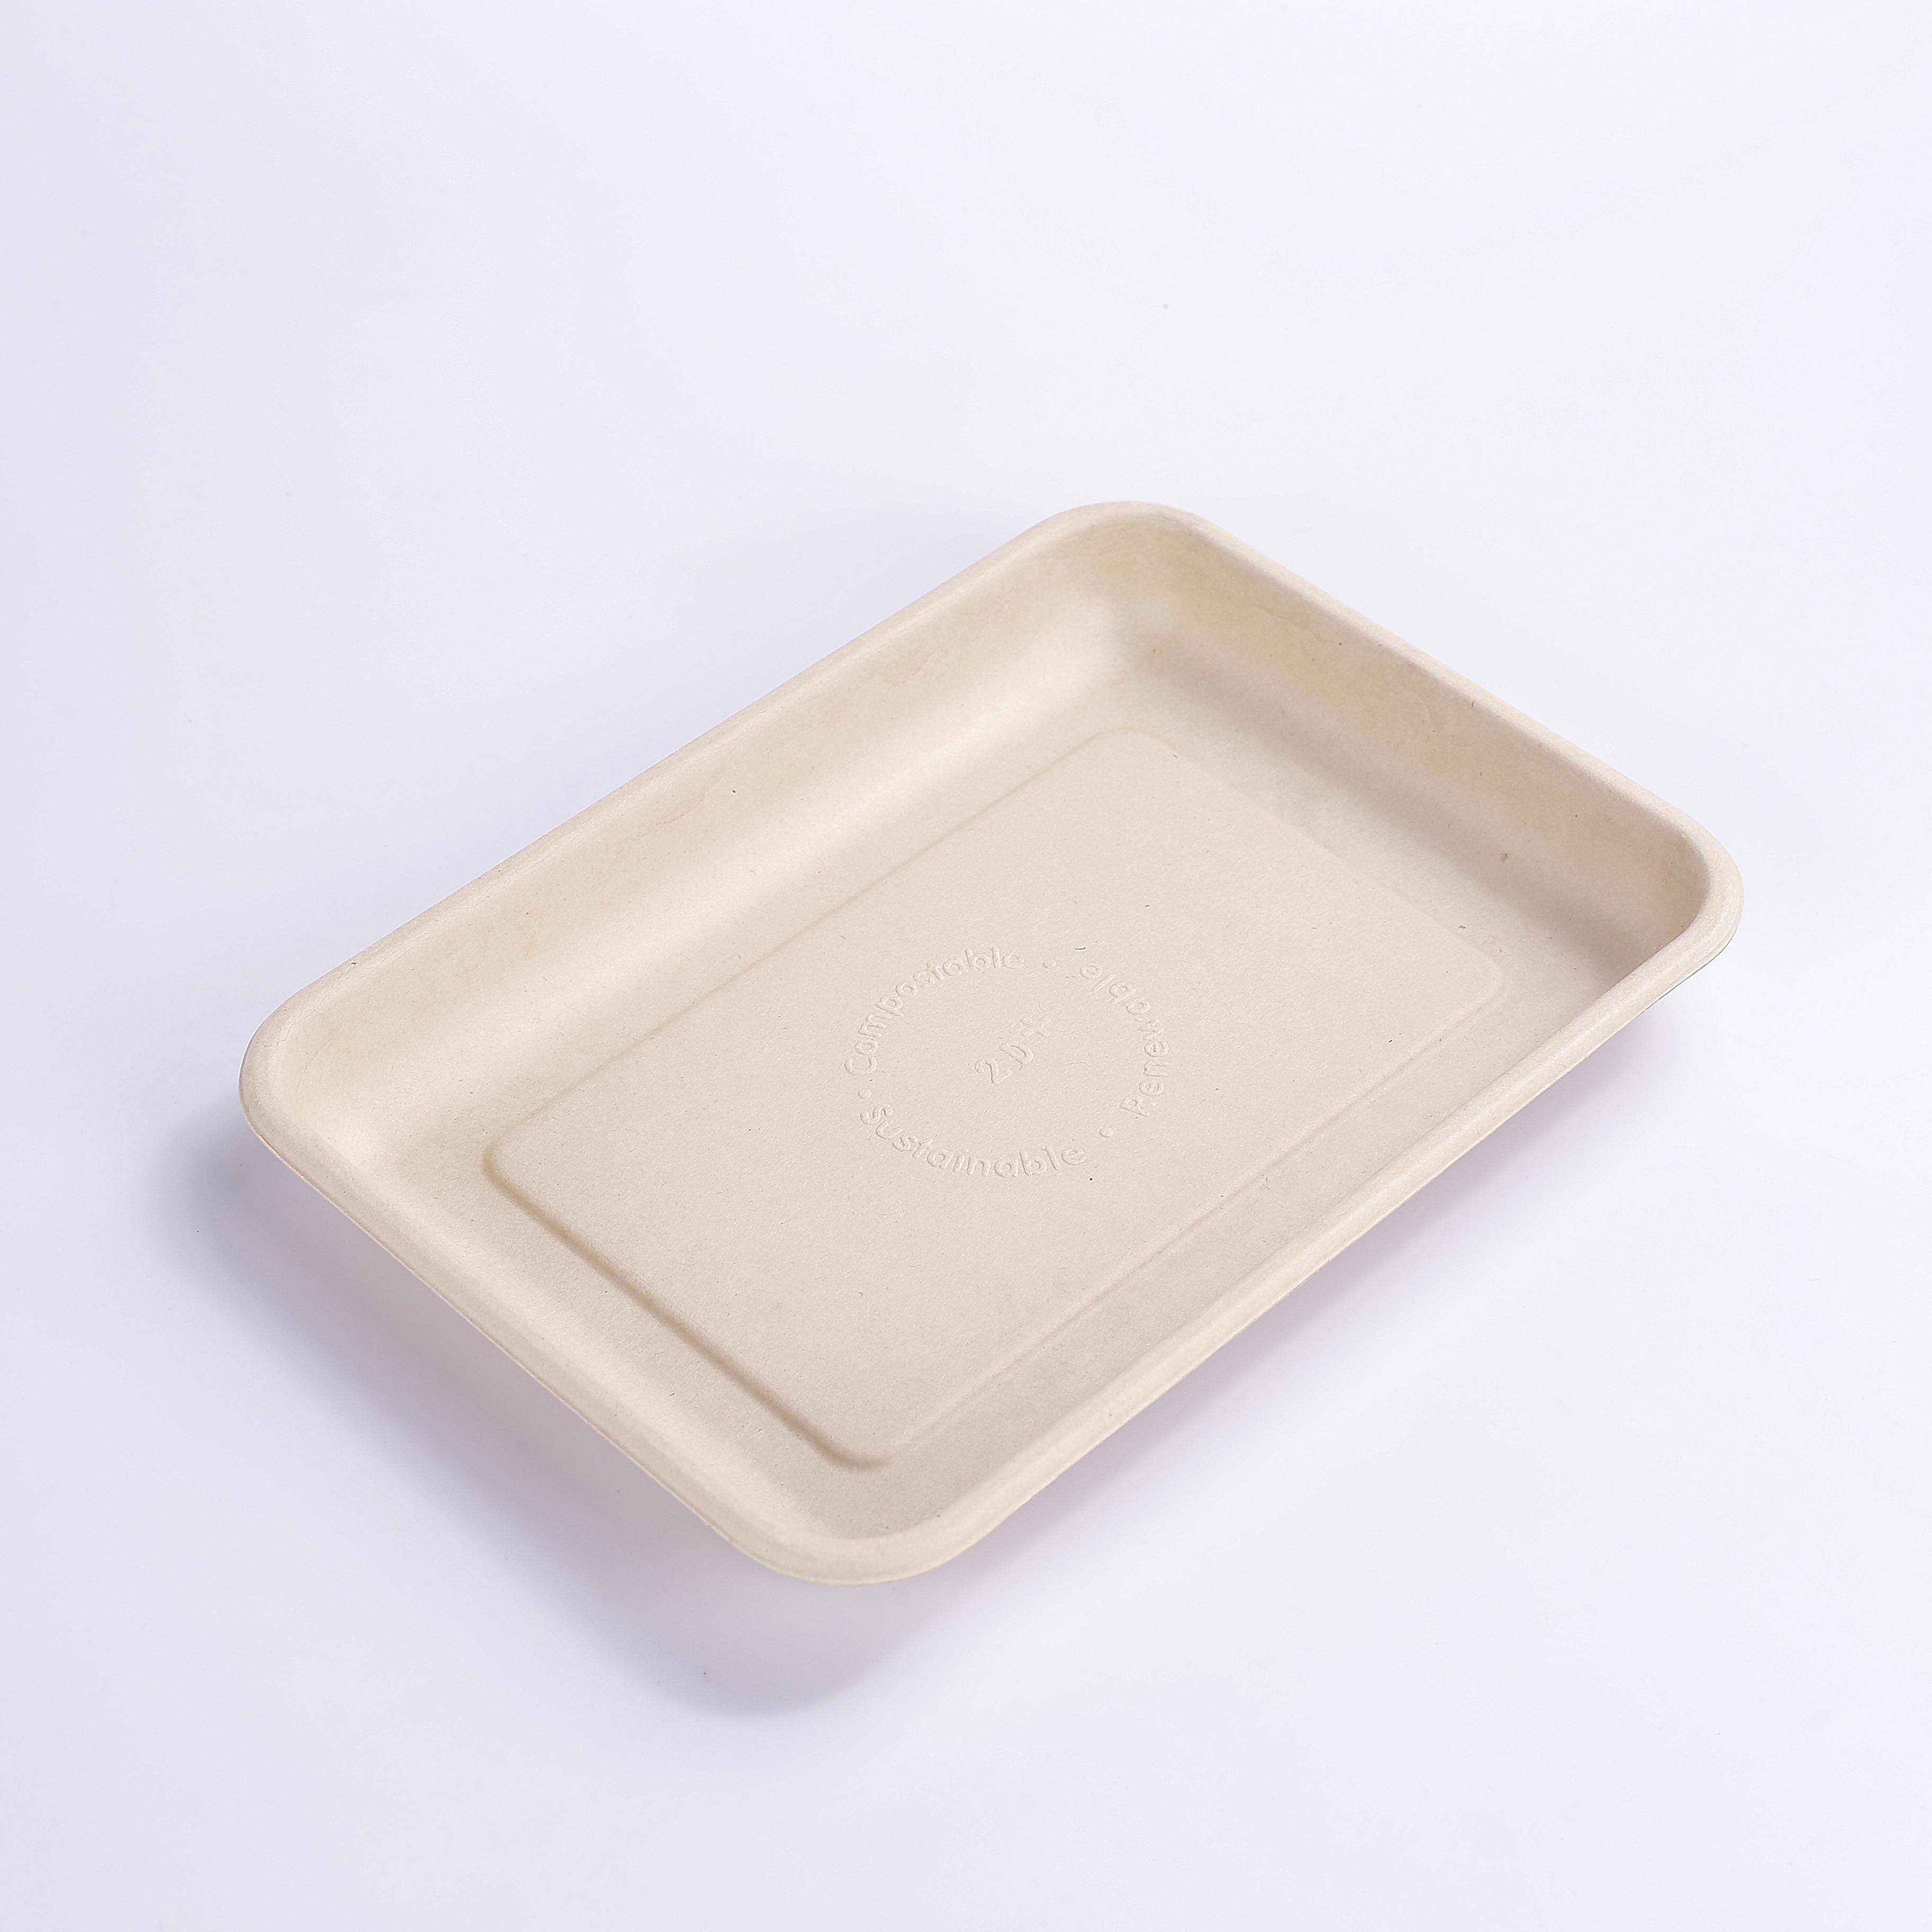 Hot-selling Sugarcane Compartment Meal Tray - 9*6.5 INCH Compostable Heavy-Duty Disposable Food BBQ Fruit Tray, Microwave Paper Plates Waterproof and Oil-Proof Heavy Duty Trays, 100% Biodegradable...